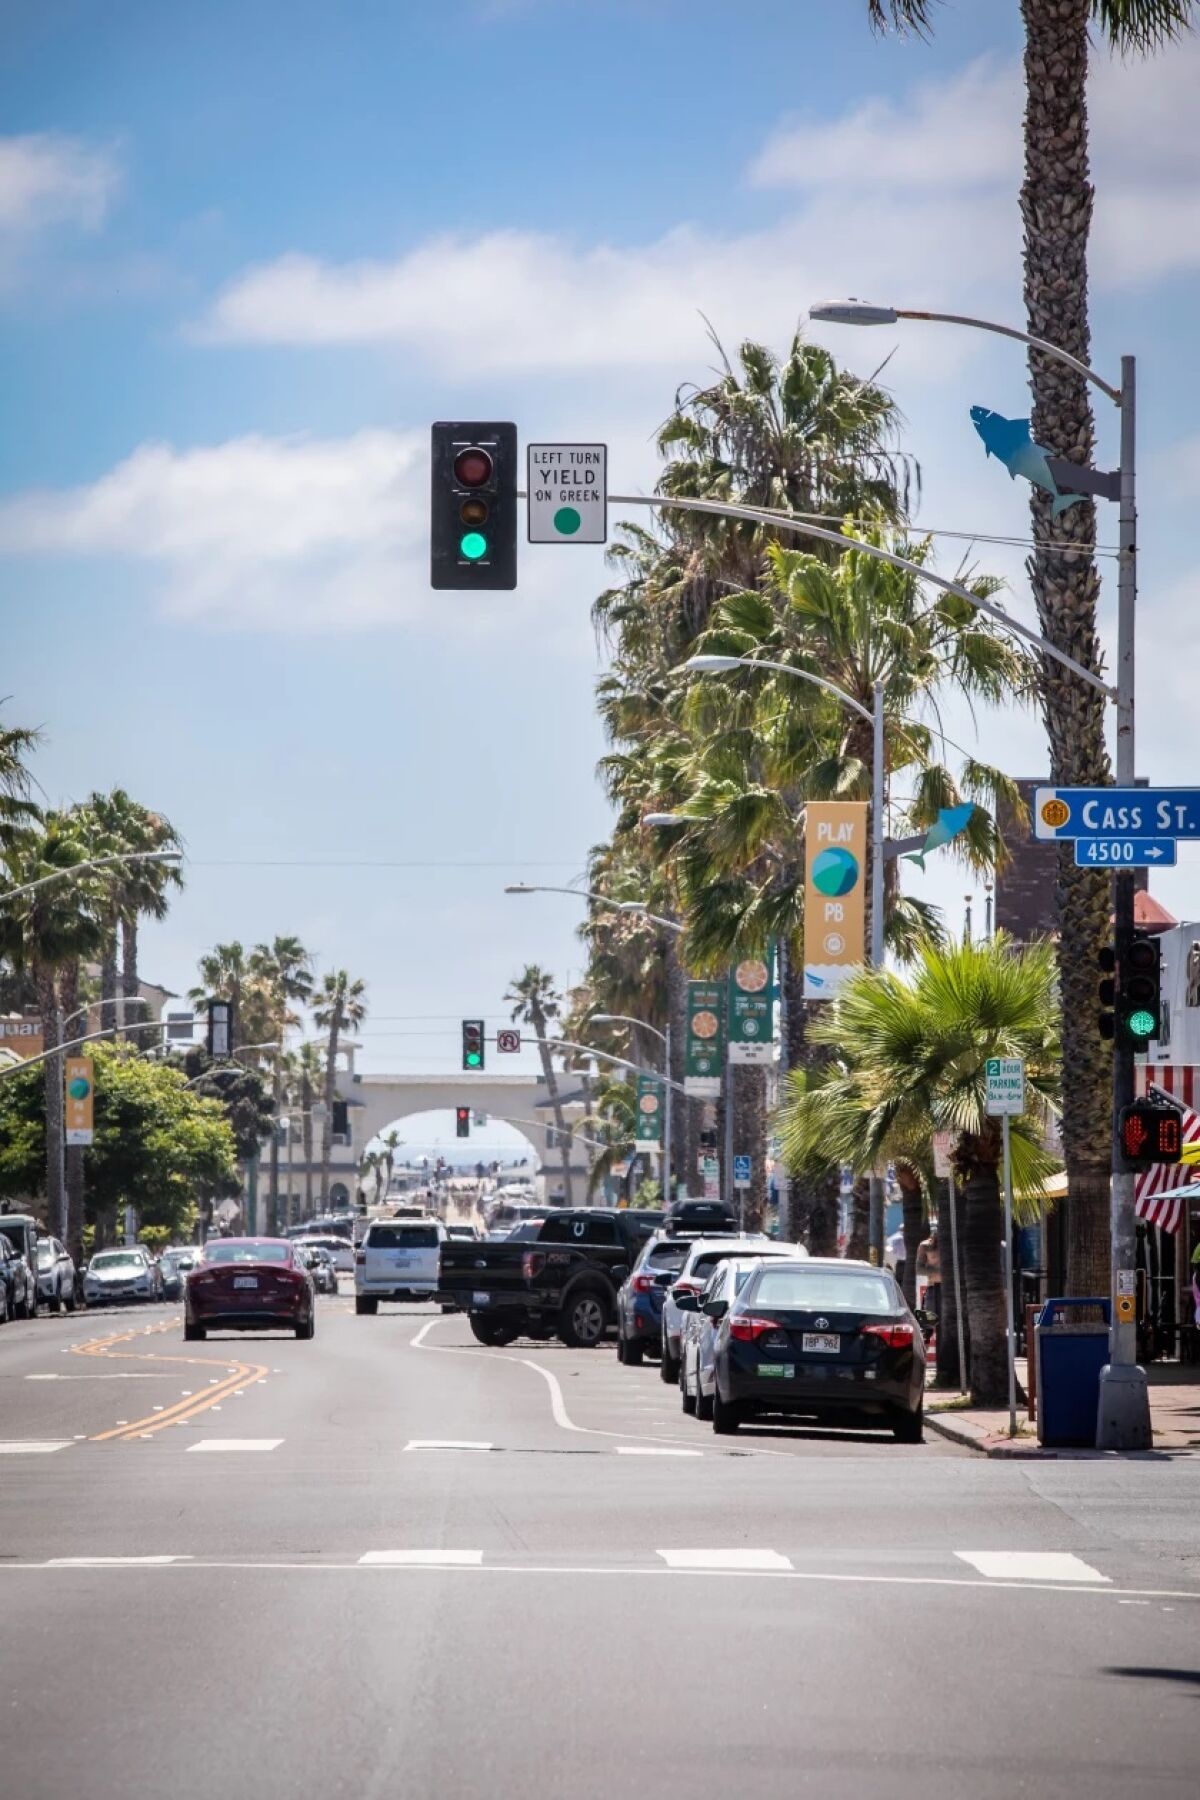 The San Diego City Council to take final vote Aug. 3 on plan for parking meters in the Garnet Avenue business district.